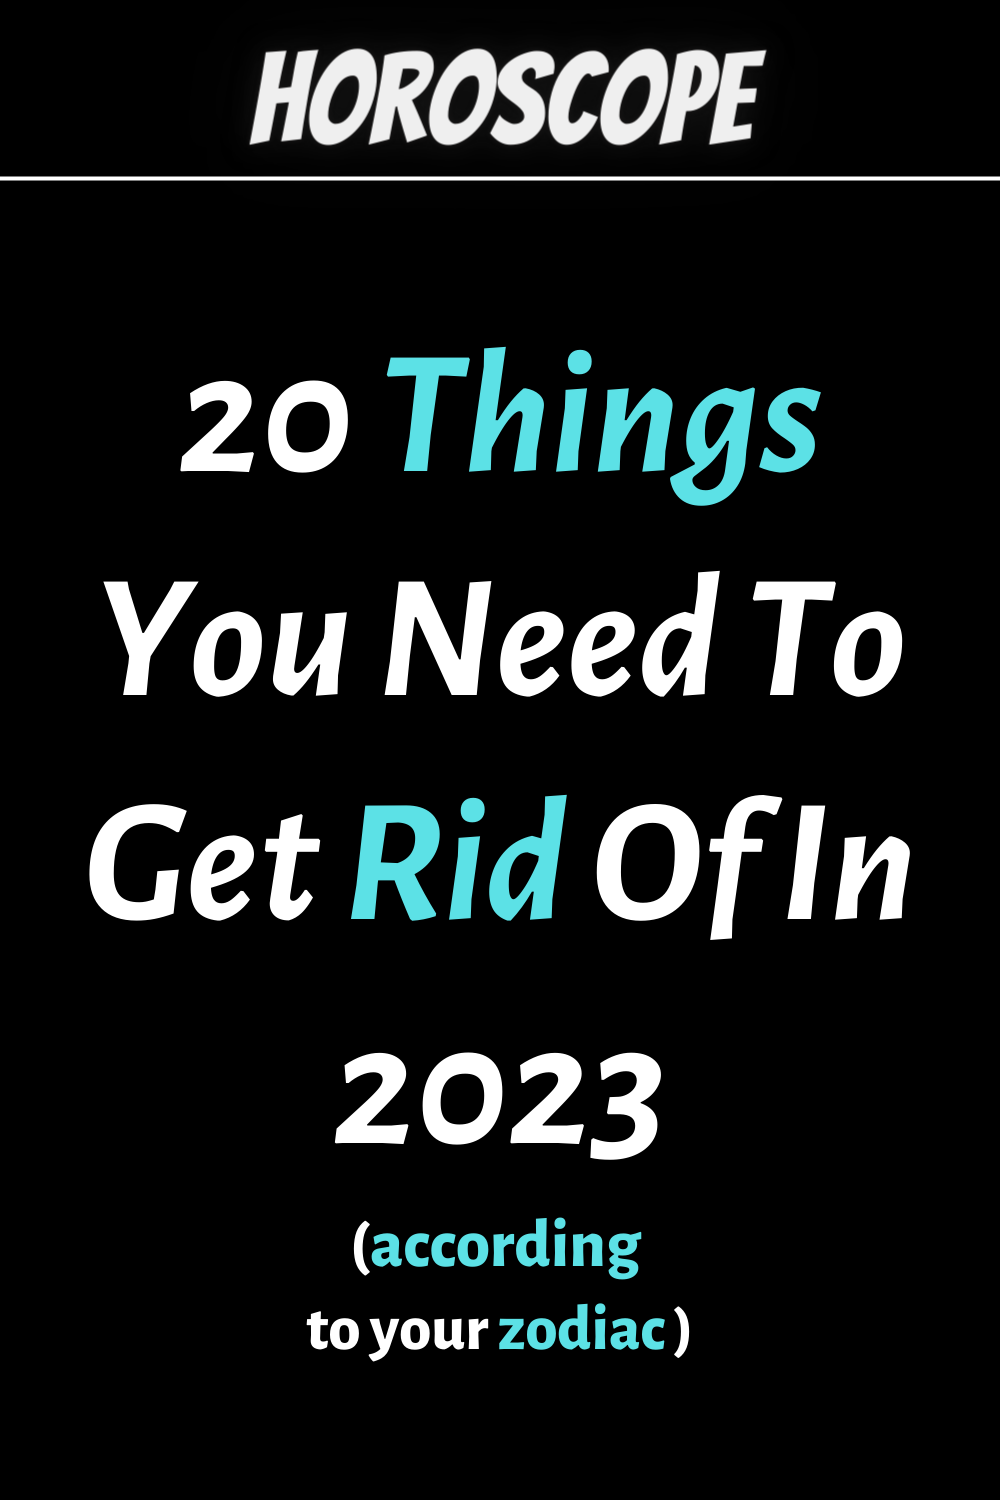 20 Things You Need To Get Rid Of In 2023